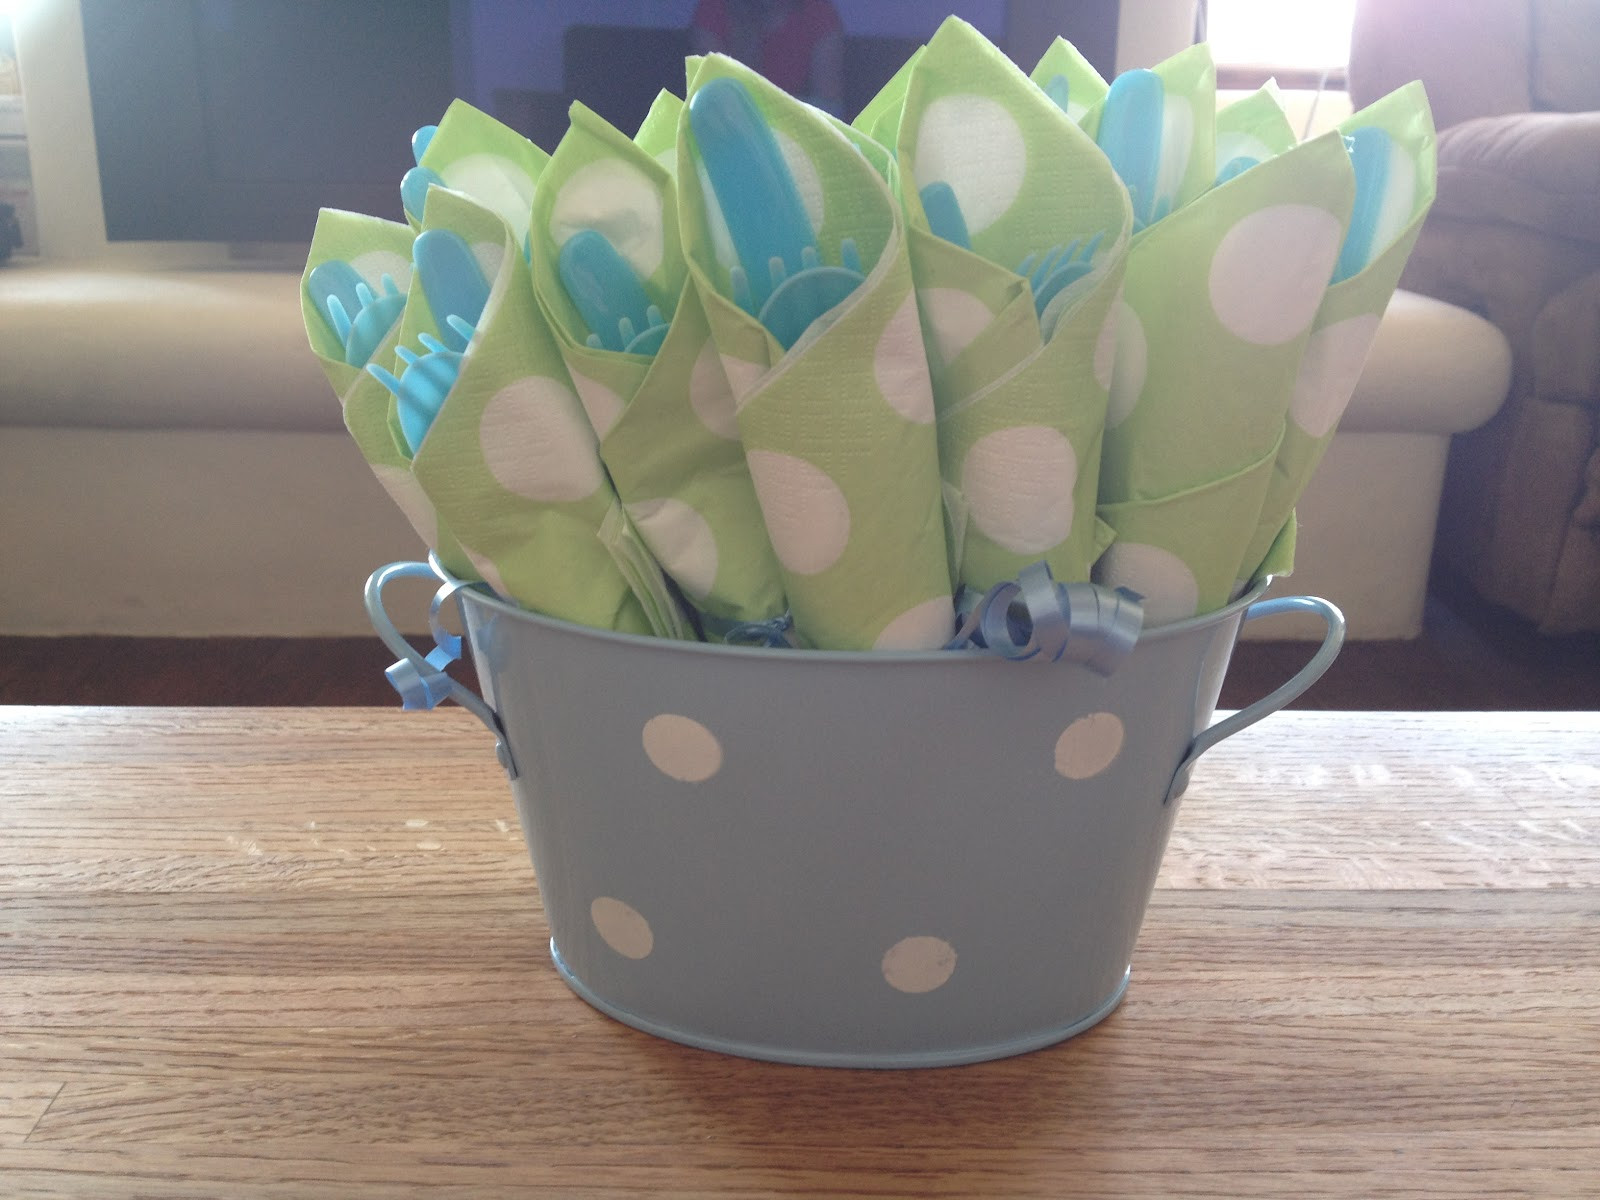 Baby Shower Crafts To Make
 Crafts Recipes and Home Decor How to make cute baby